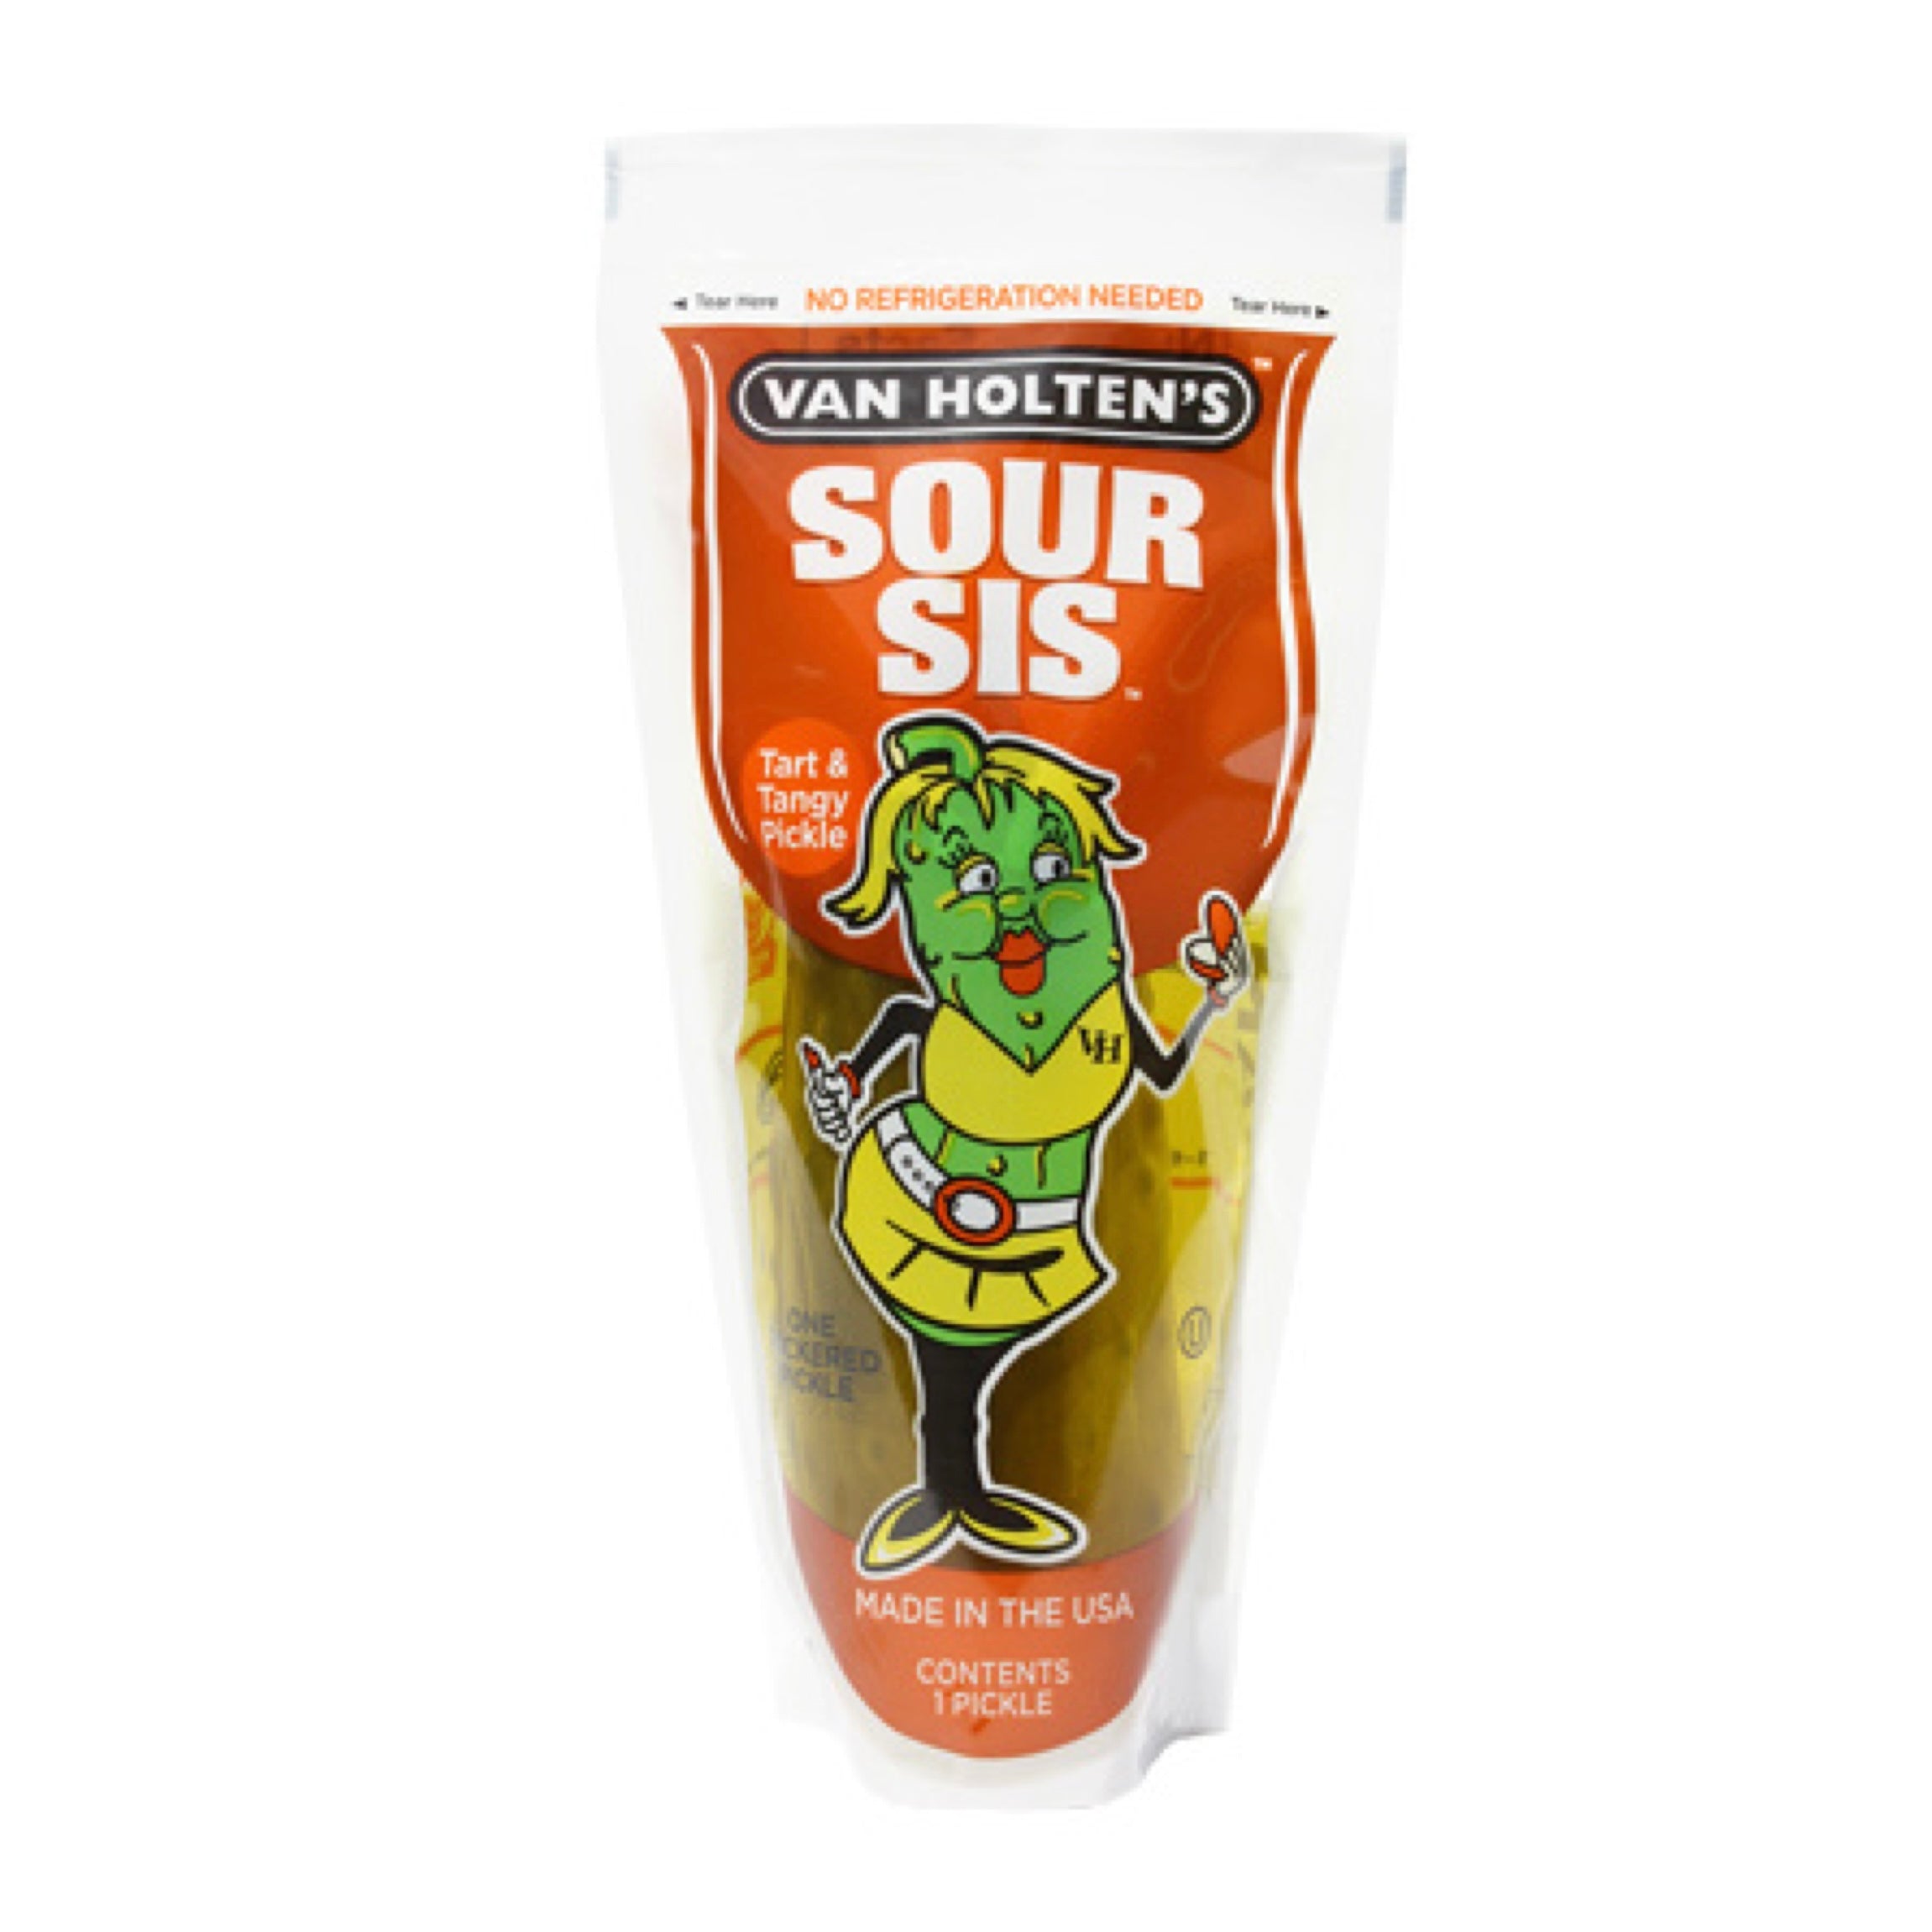 Van Holten’s Sour Sis King Size Pickle